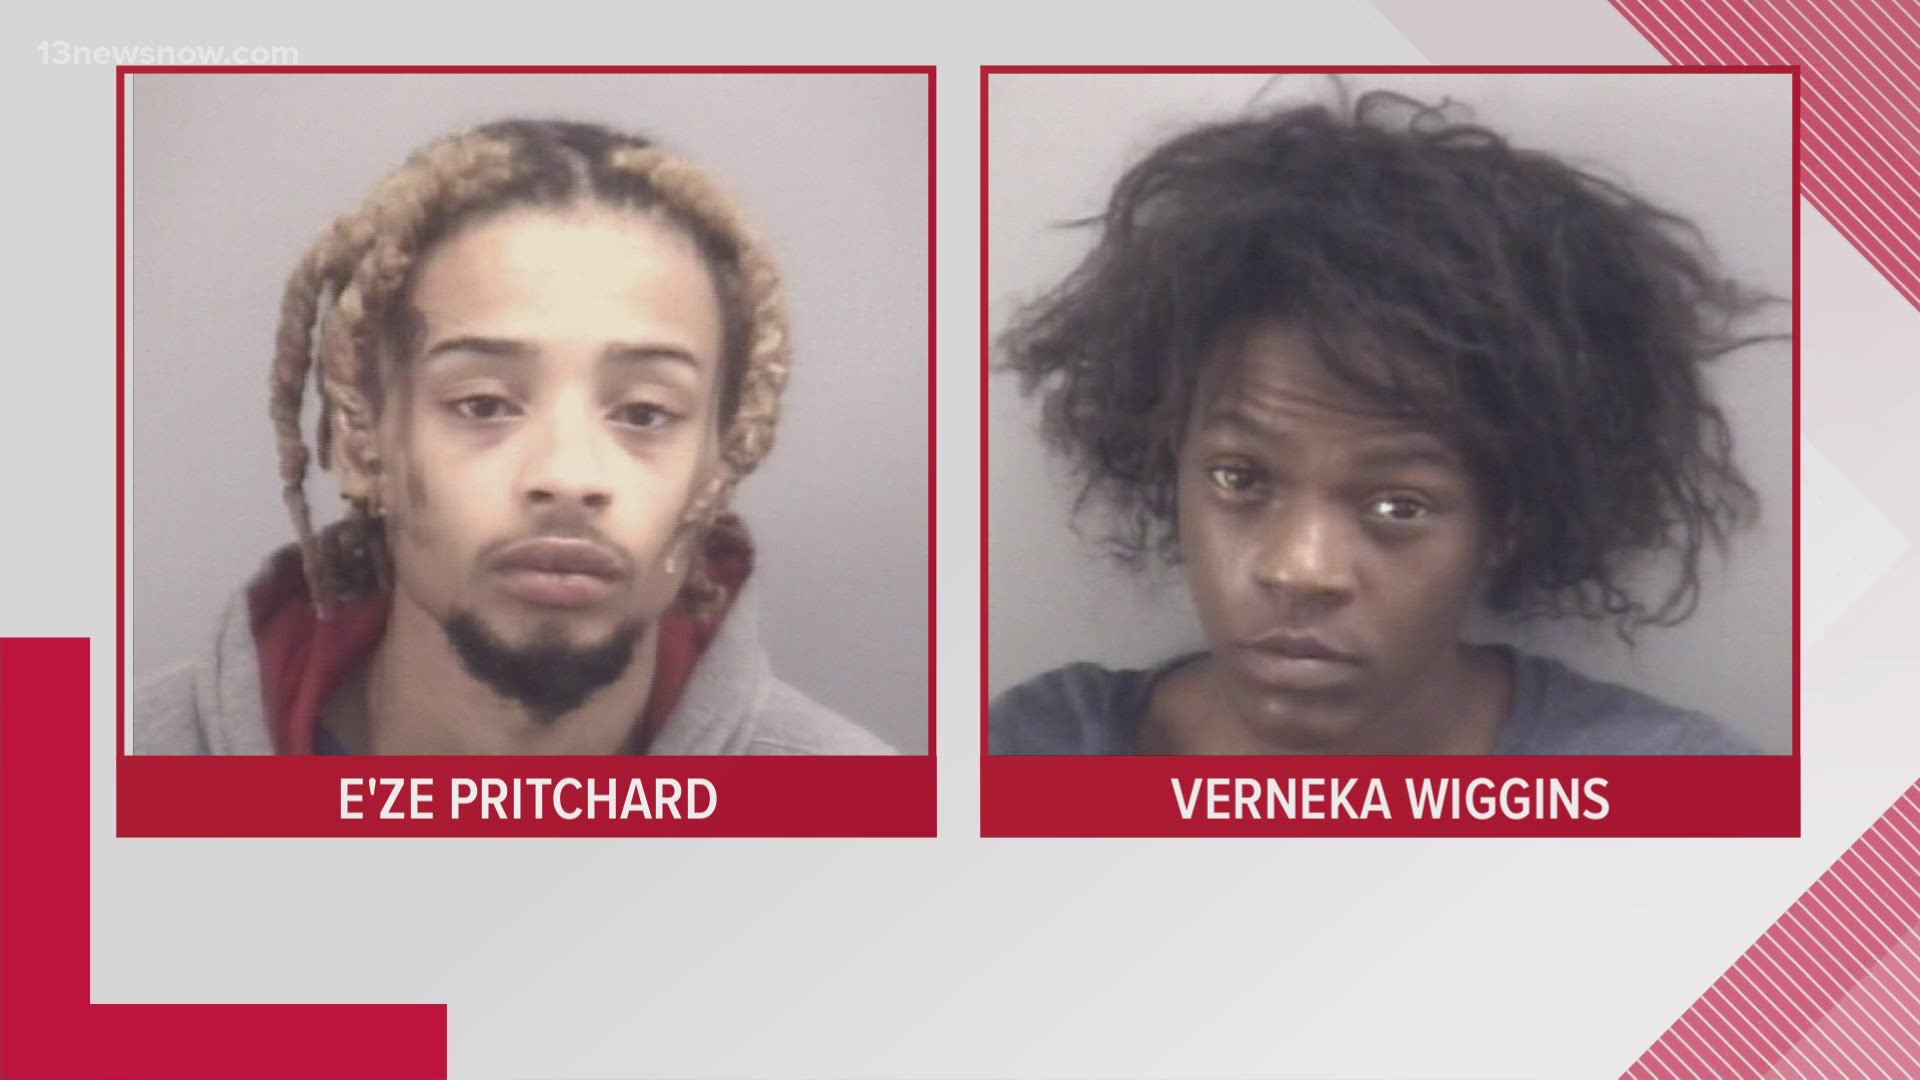 22-year-old E'ze Anyanwu Pritchard is facing several gun charges, and 24-year-old Verneka Wiggins is charged with accessory after the fact in a felony.